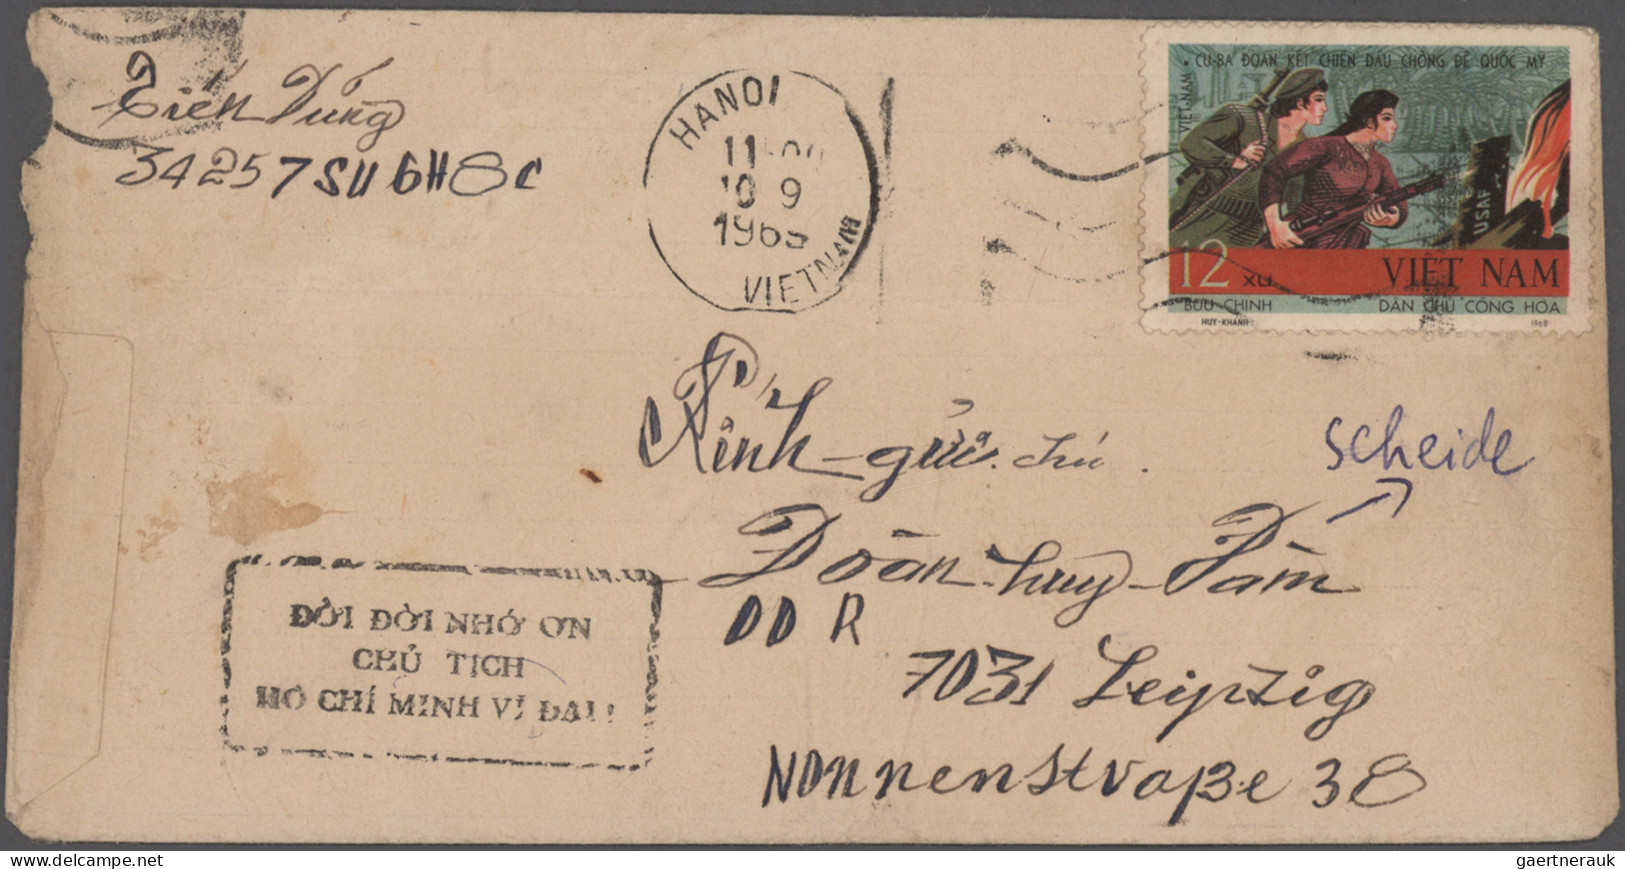 Oversea: 1858/1990 (ca.), assortment of apprx. 75 covers/cards, comprising e.g.